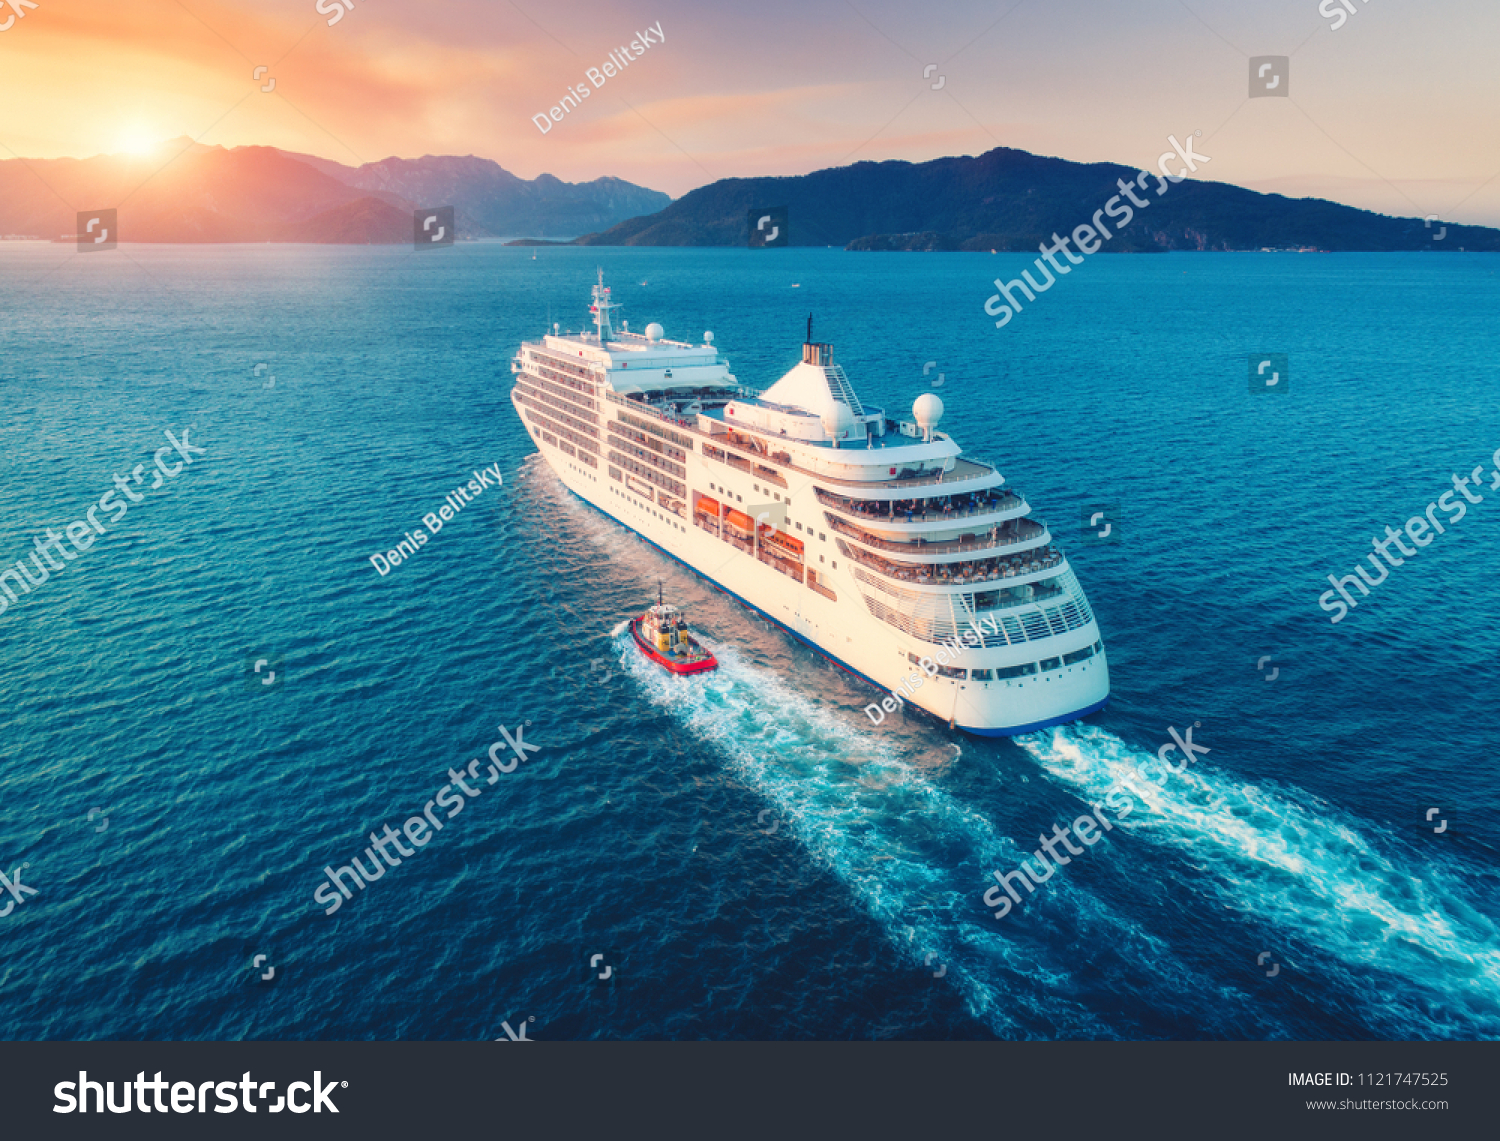 Cruise ship at harbor. Aerial view of beautiful large white ship at sunset. Colorful landscape with boats in marina bay, sea, colorful sky. Top view from drone of yacht. Luxury cruise. Floating liner #1121747525